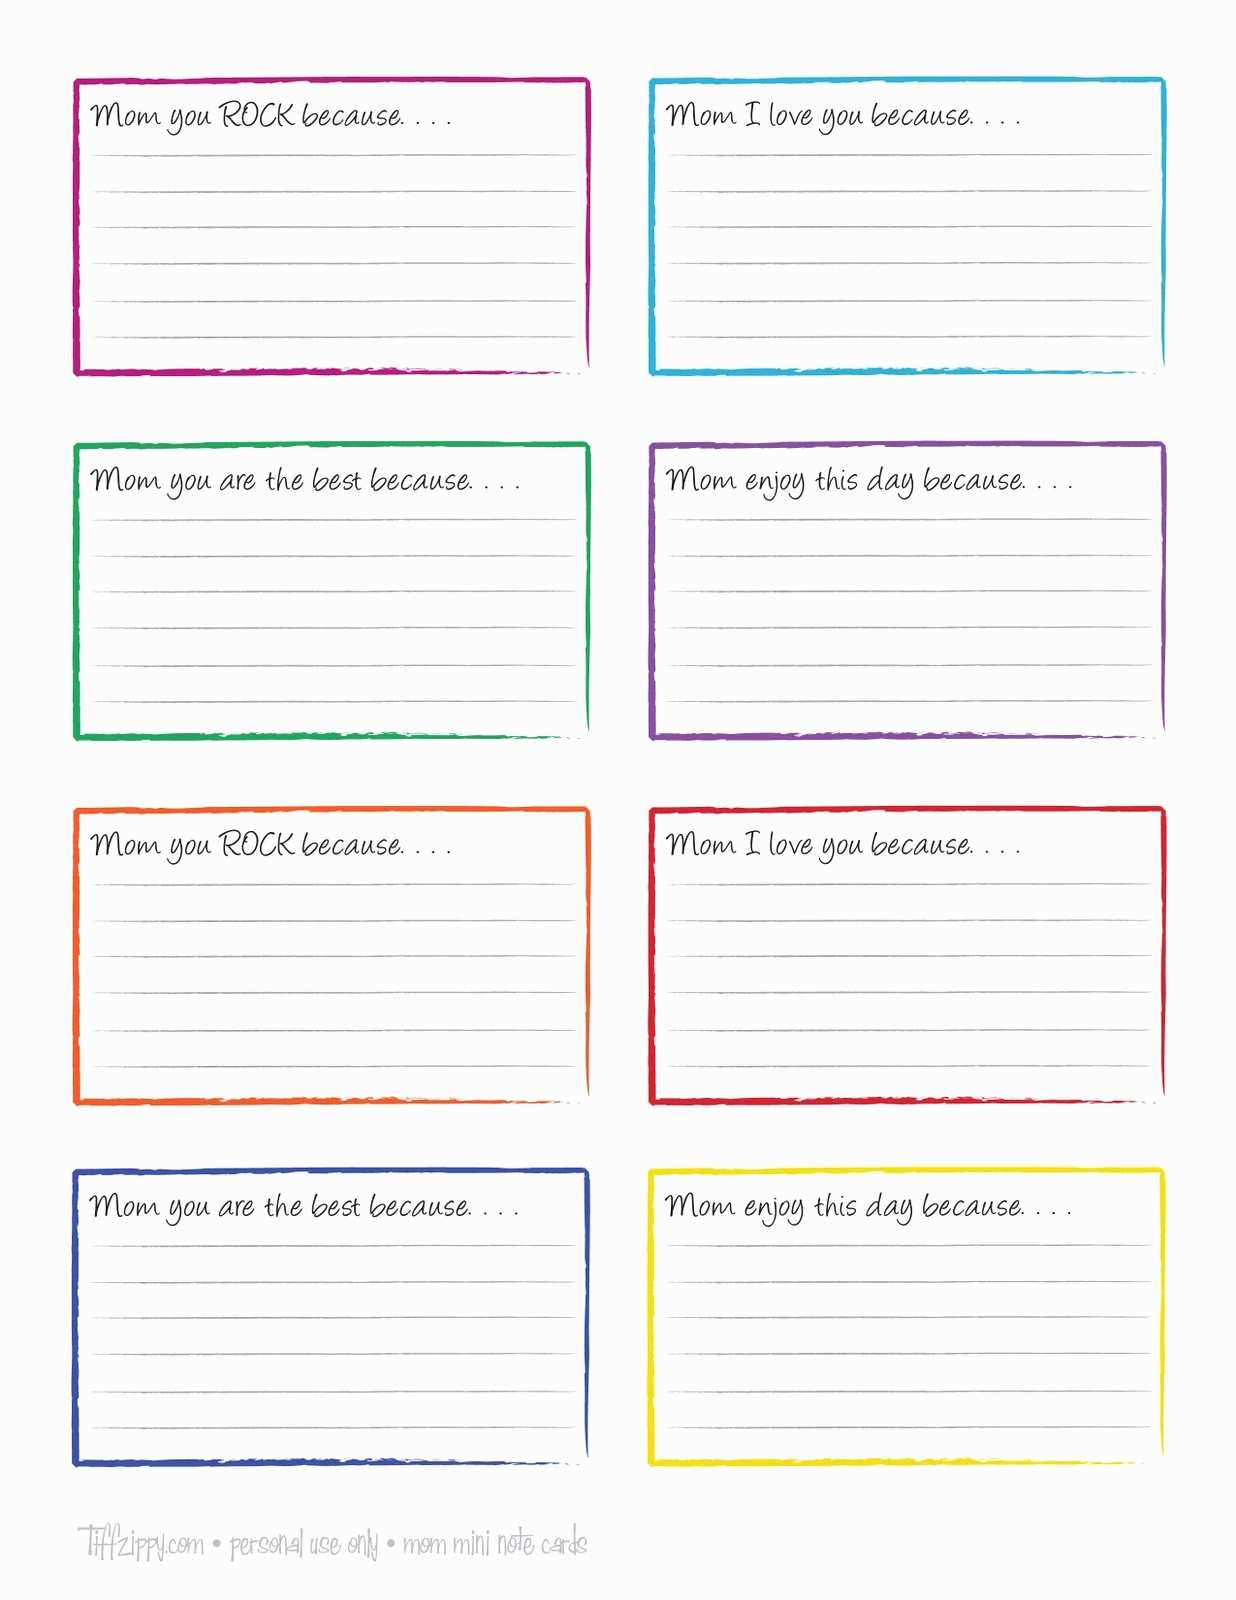 63 Visiting Free Printable Blank Note Card Template Maker By Free Printable Blank Note Card Template Cards Design Templates